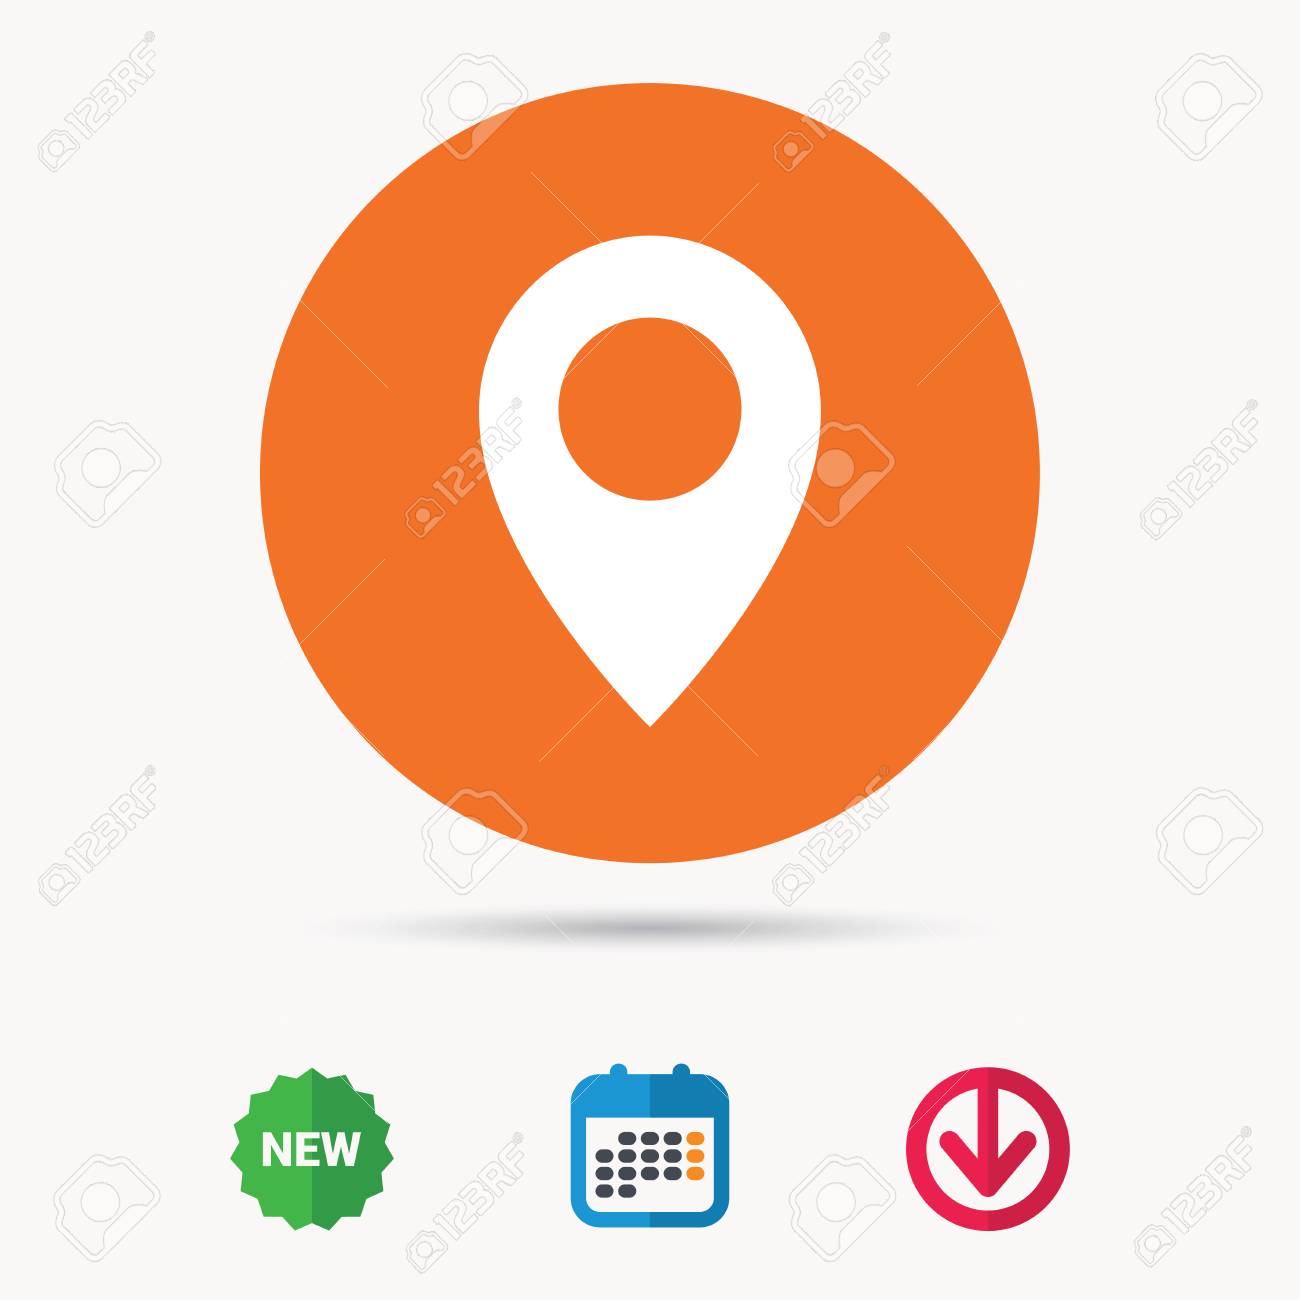 new-location-icon-424596-free-icons-library